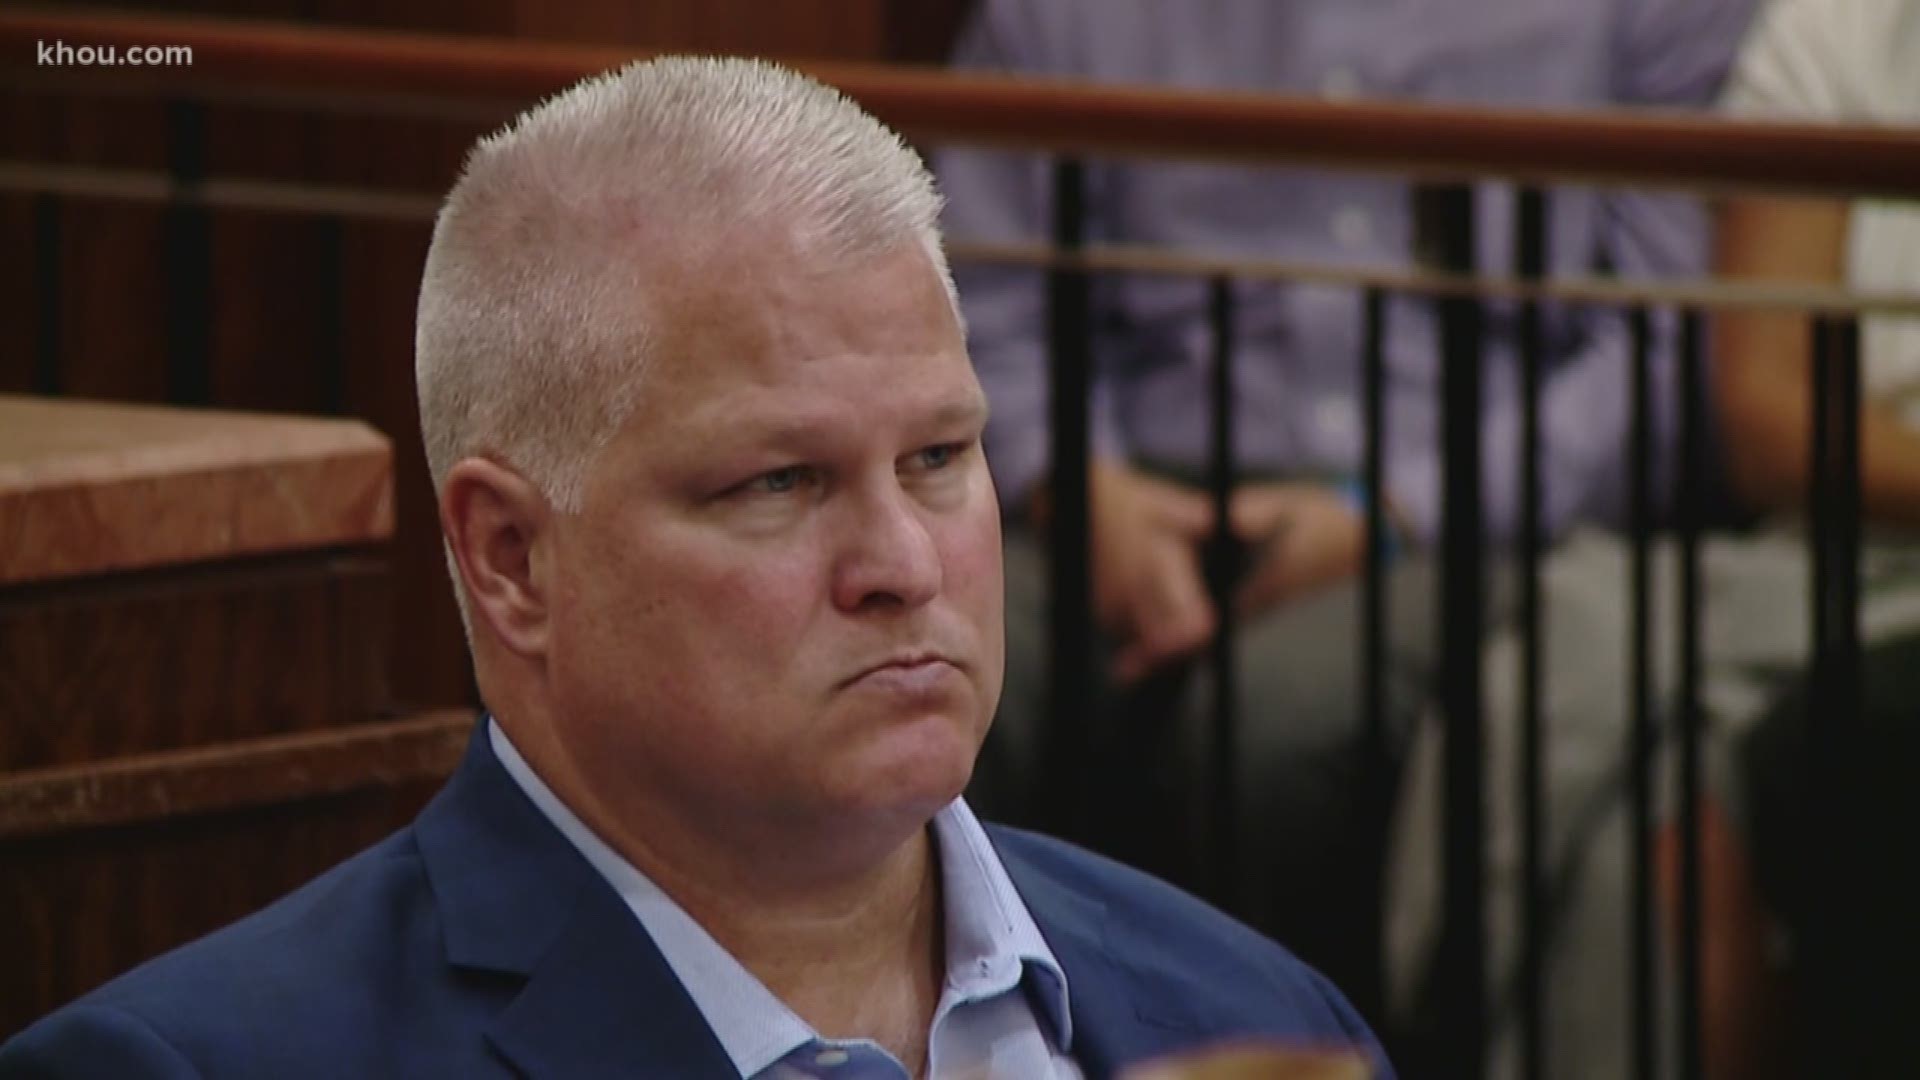 The jury began deliberating Monday in the second murder trial of a former Texas high school football coach accused of killing his pregnant wife two decades ago.